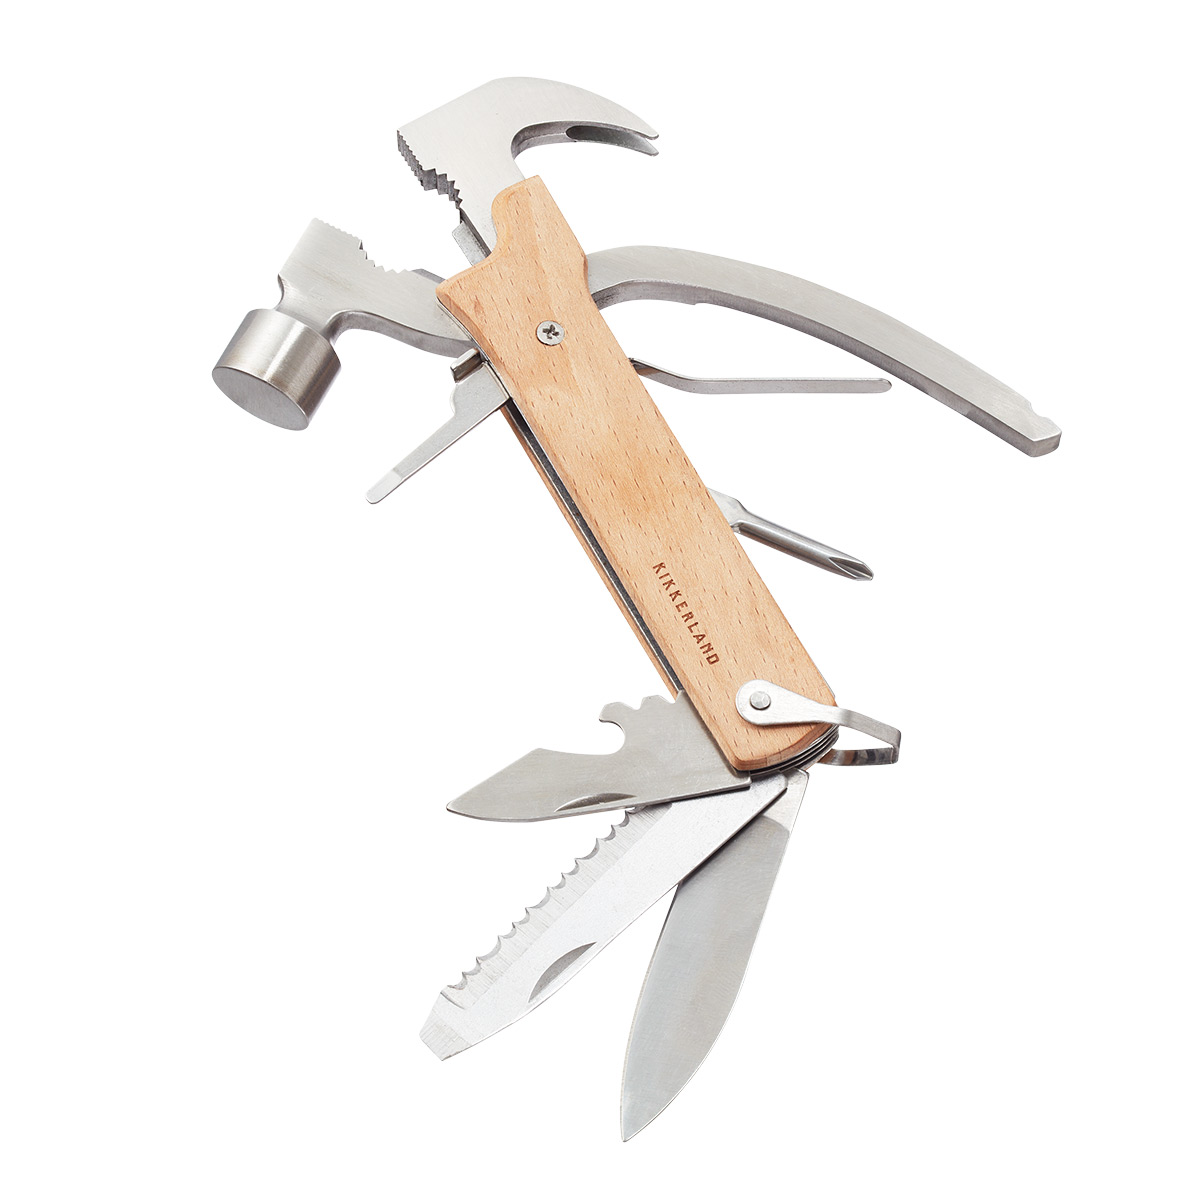 Kikkerland Wood Hammer Multi-Tool | The Container Store